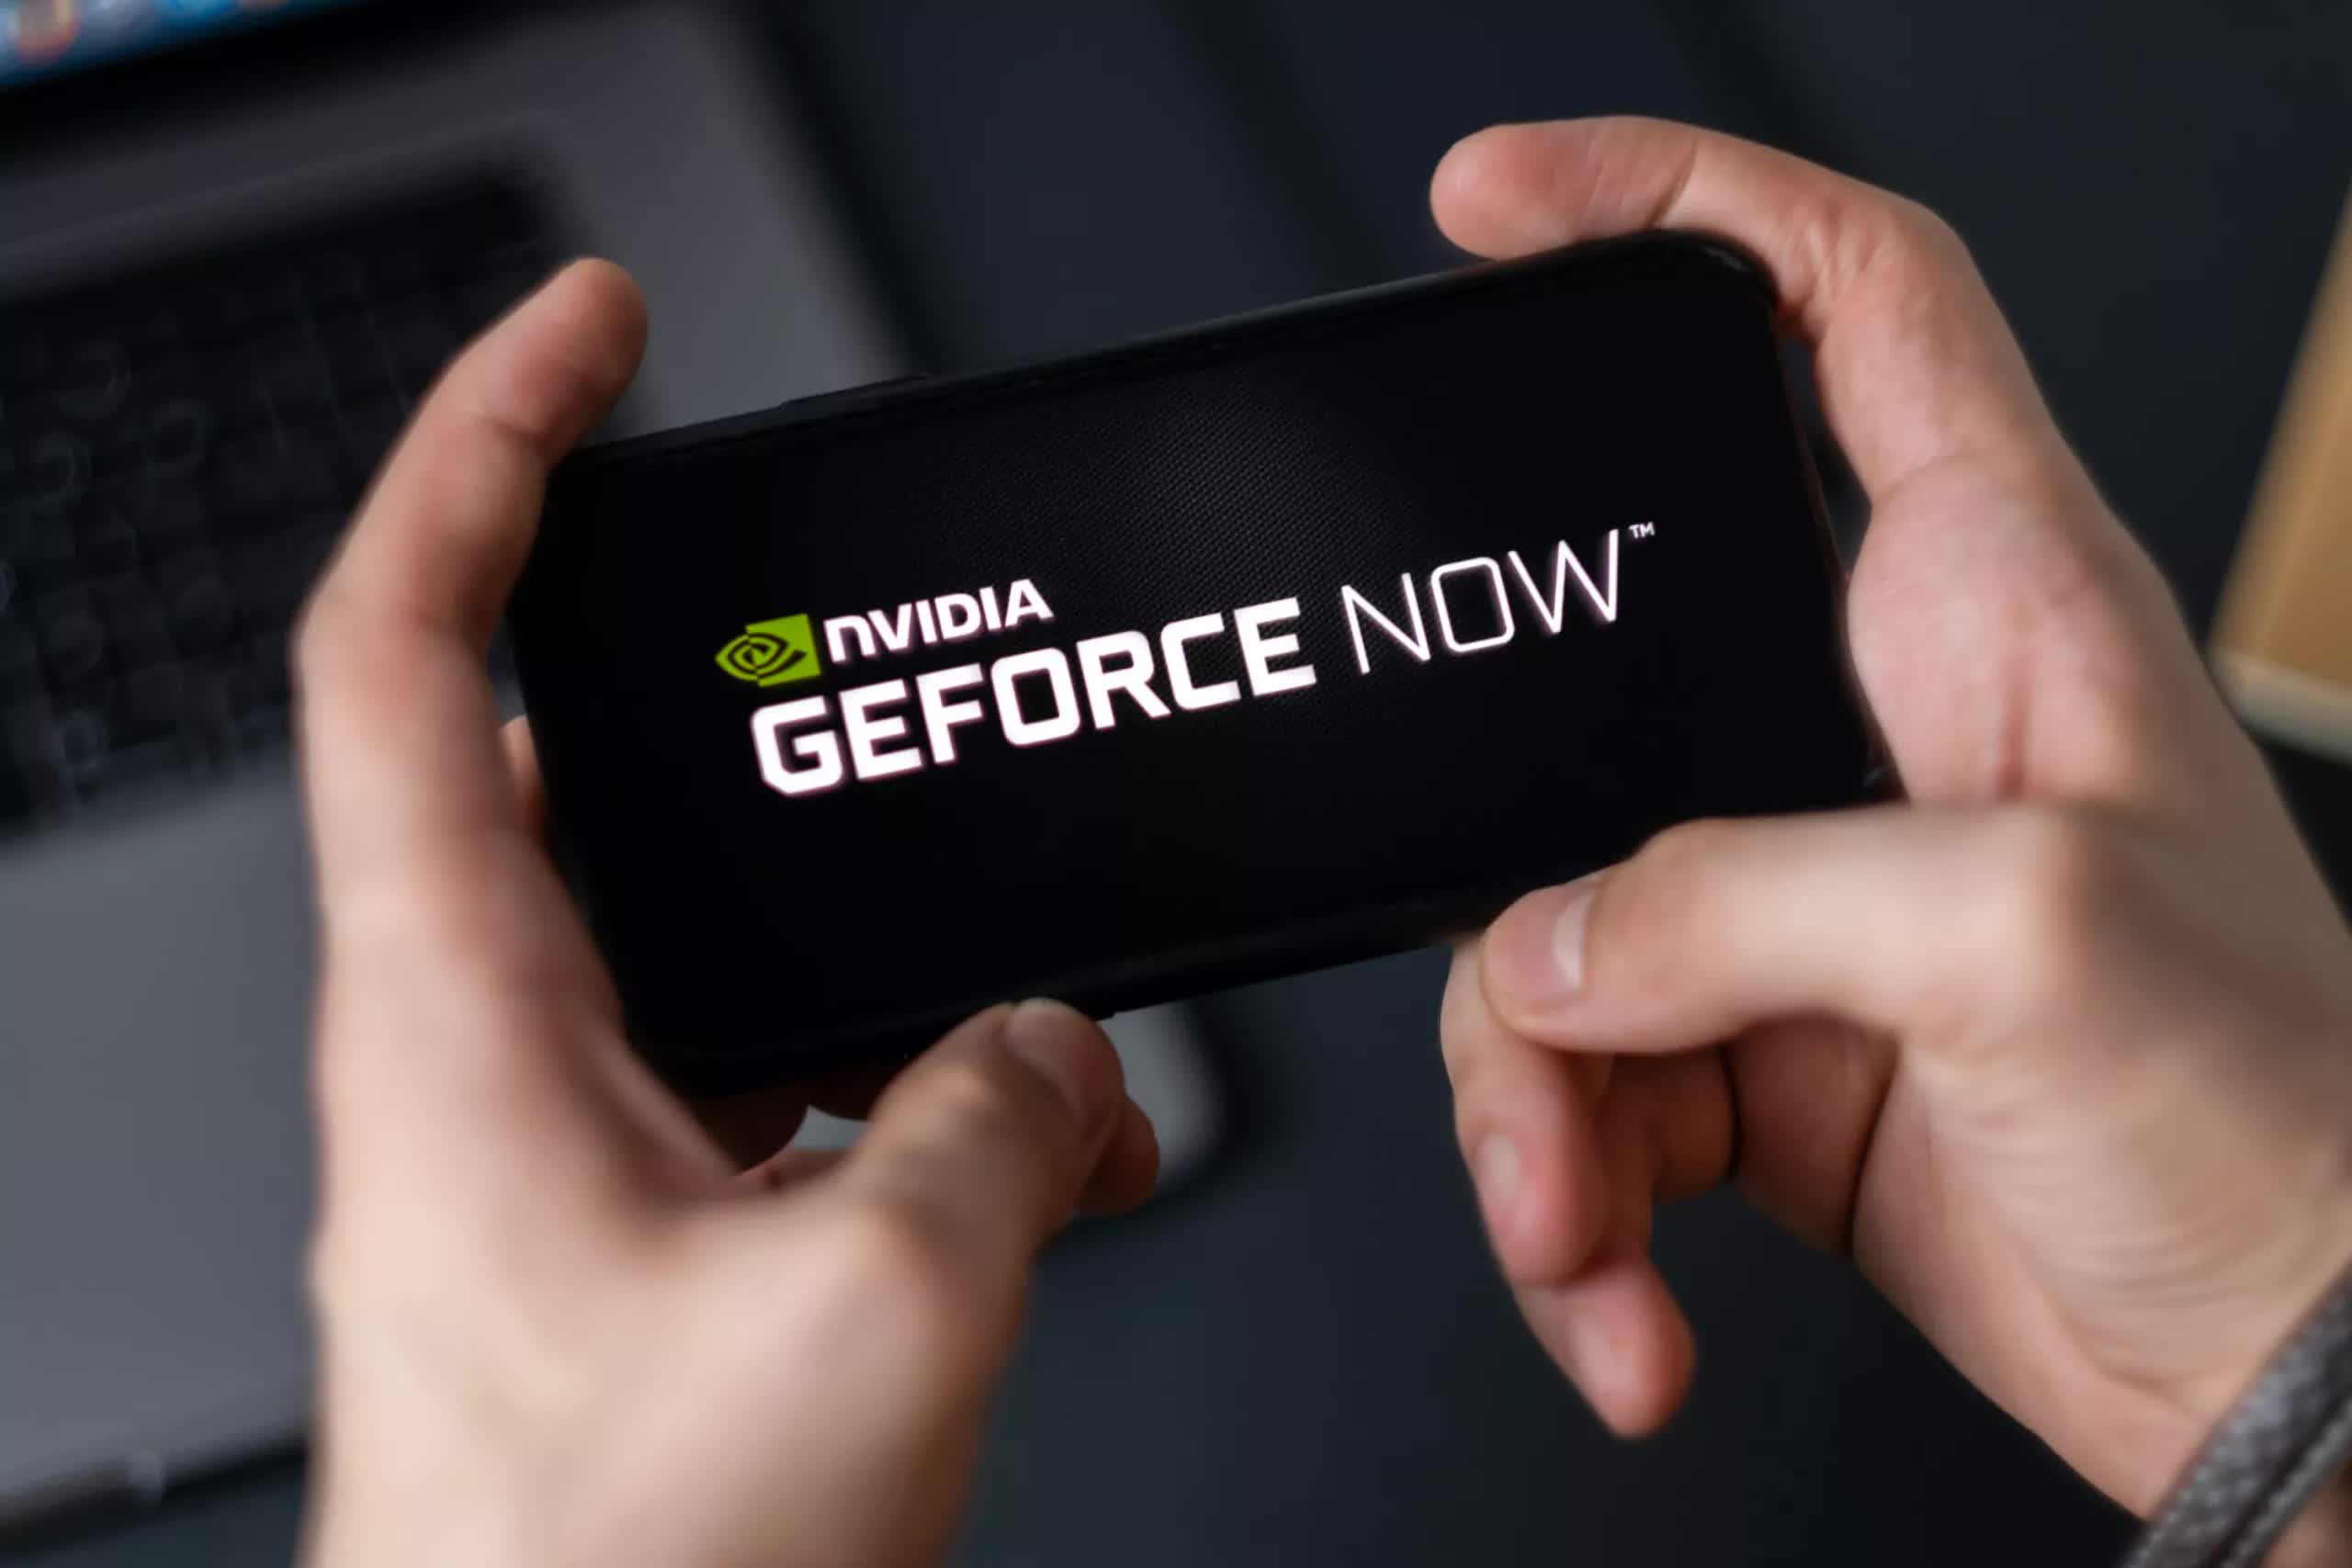 GeForce Now cloud gaming service is now available as a web app for iPhone and iPad